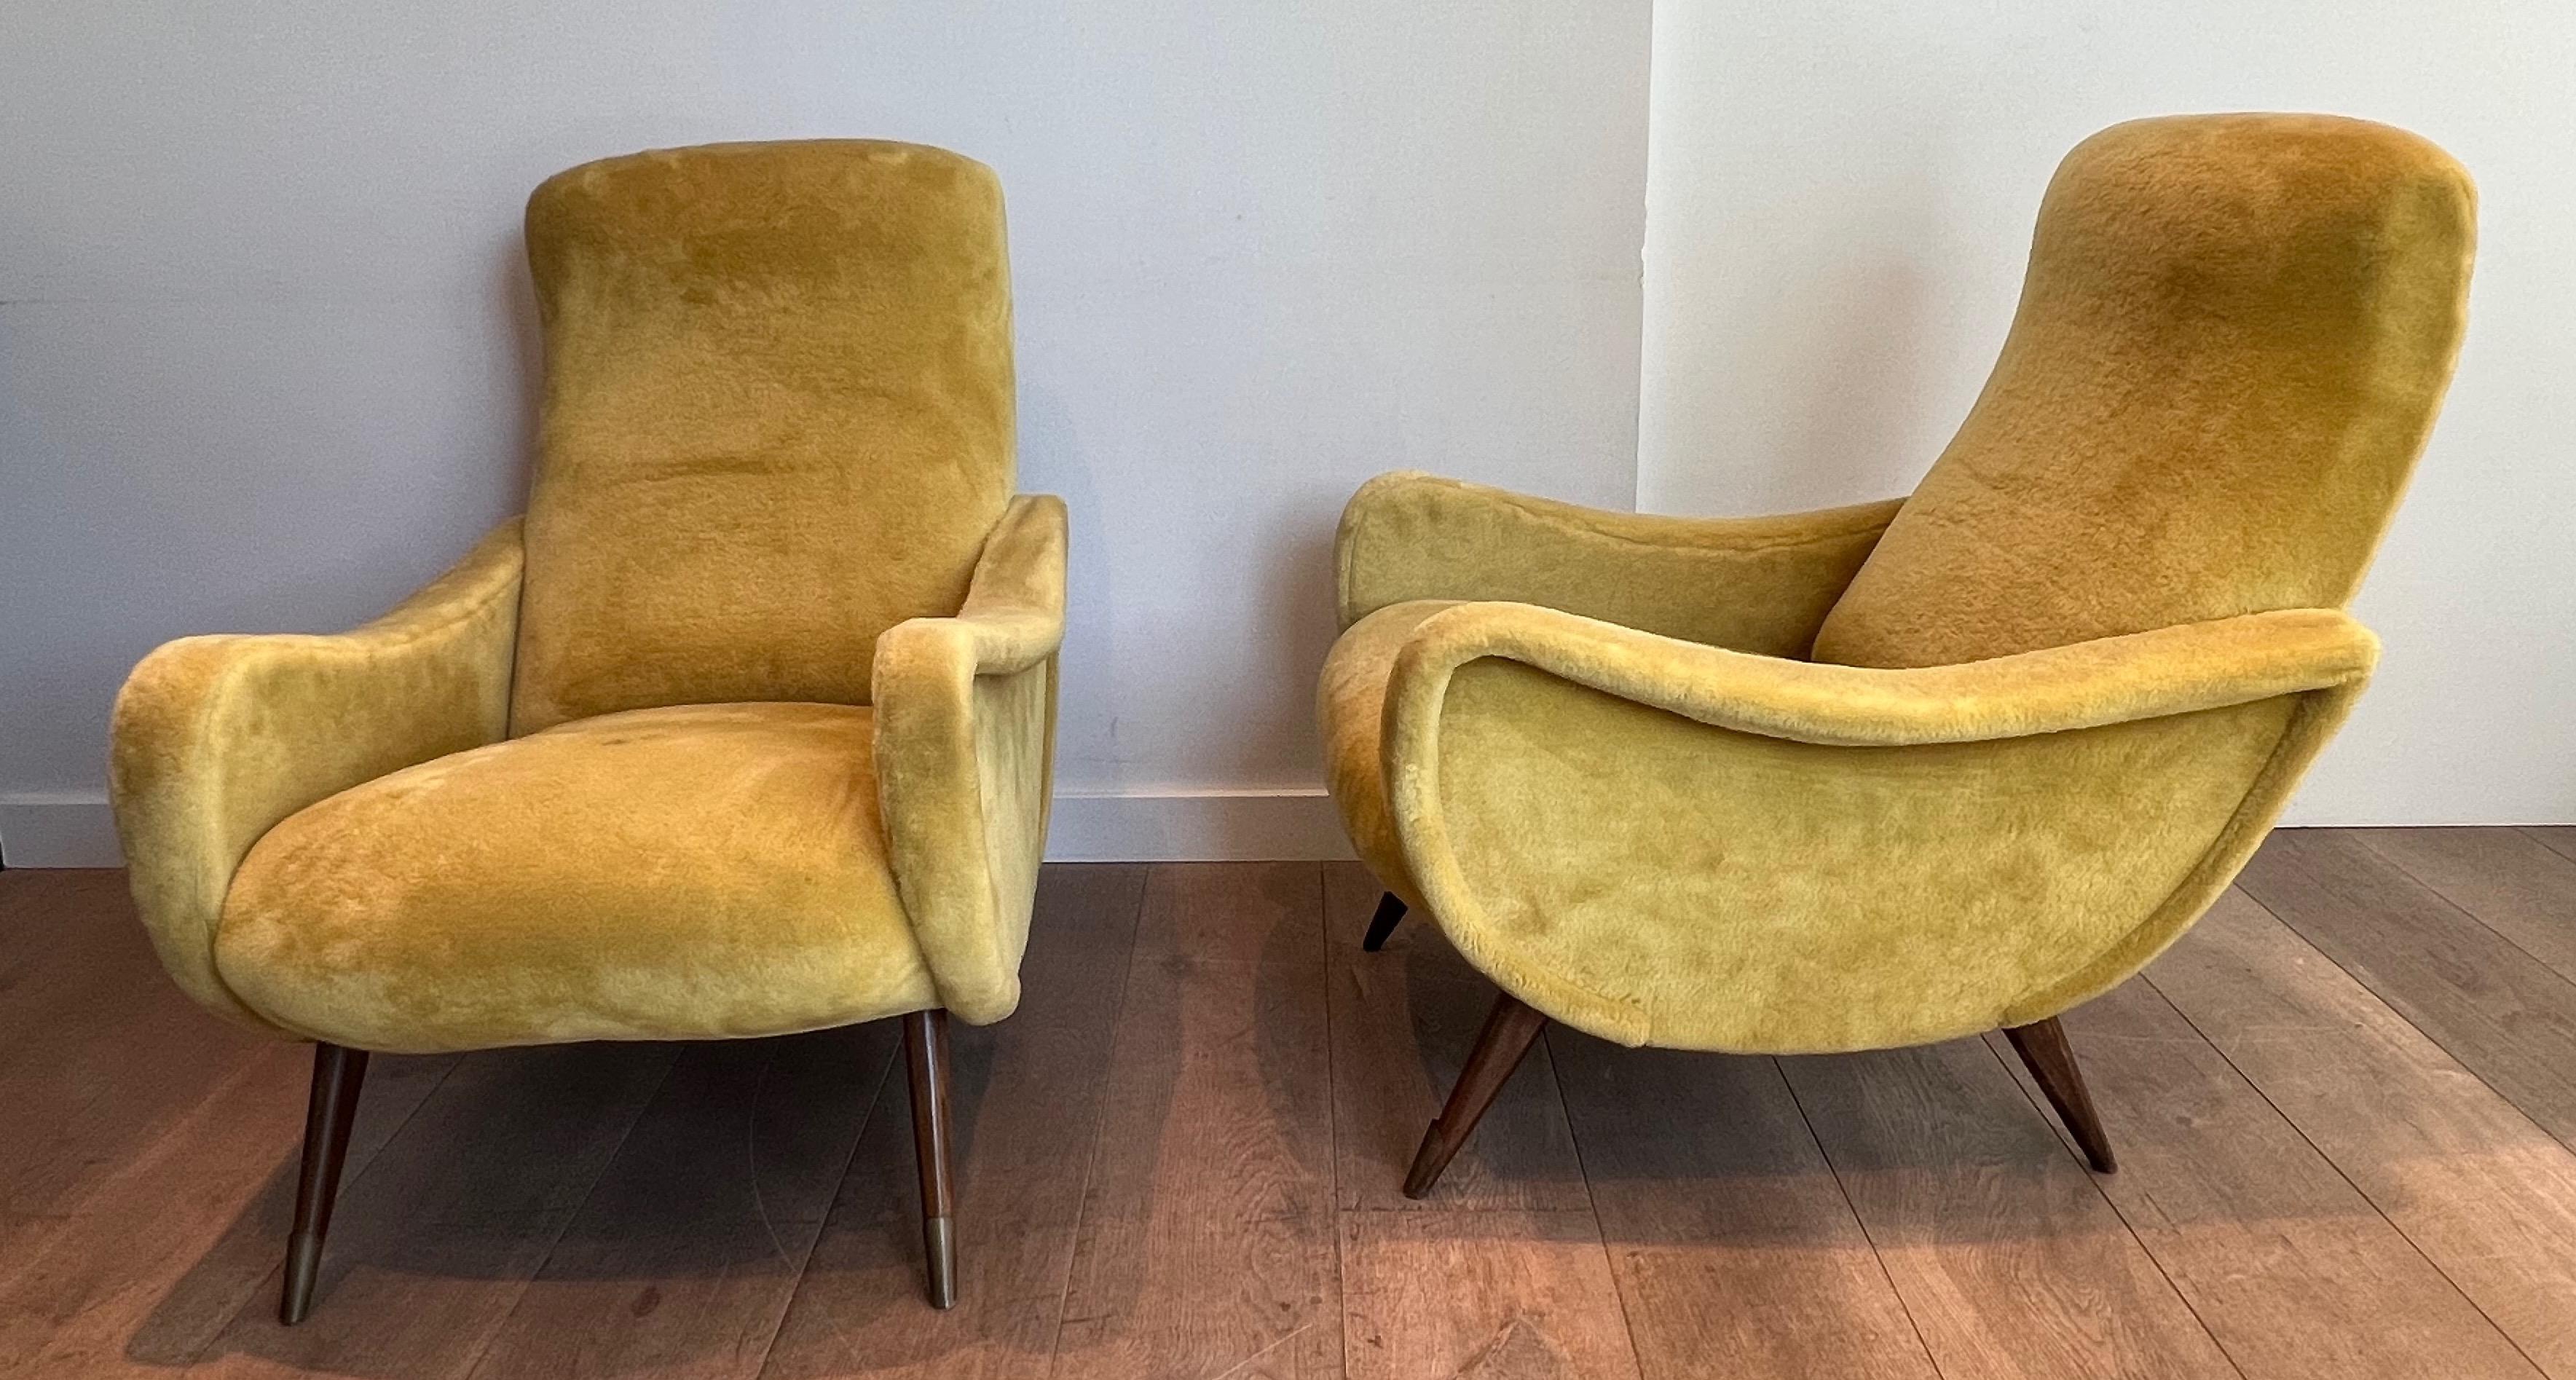 This very nice and iconic pair of design armchairs is made of a yellow velvet and wooden compass base decorated with a brass plaque on the front legs. This is an Italian work by famous designer Marco Zanusso. Circa 1960.